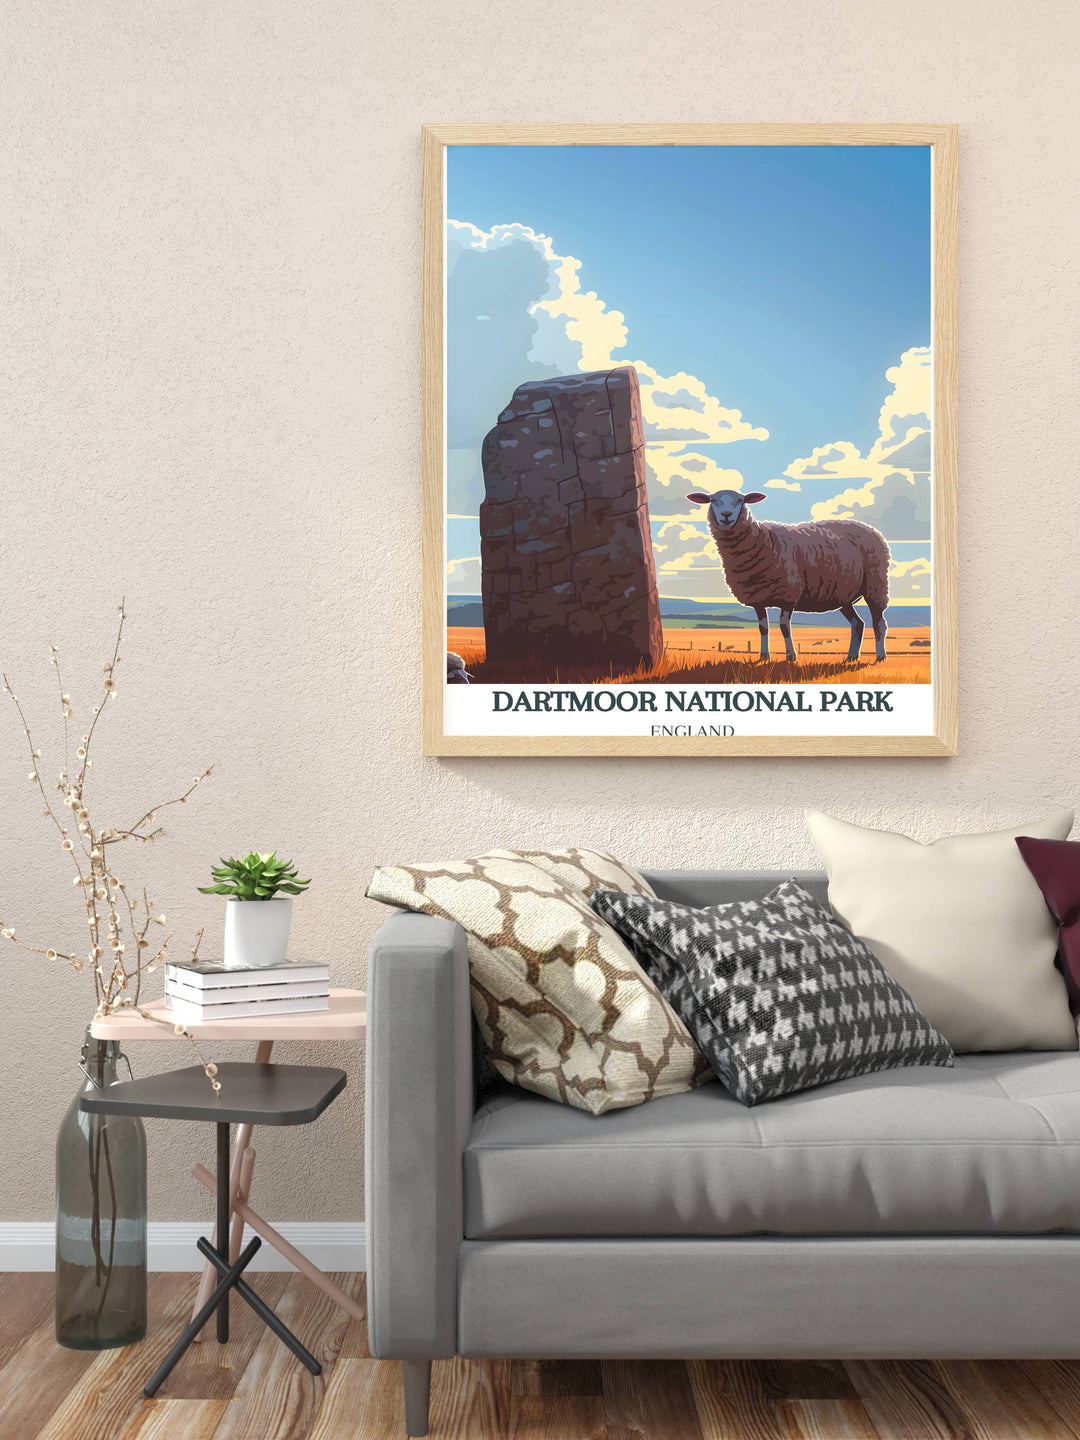 Haytor depicted in a grass covered landscape offering a serene and calm summer scene ideal for seasonal home décor